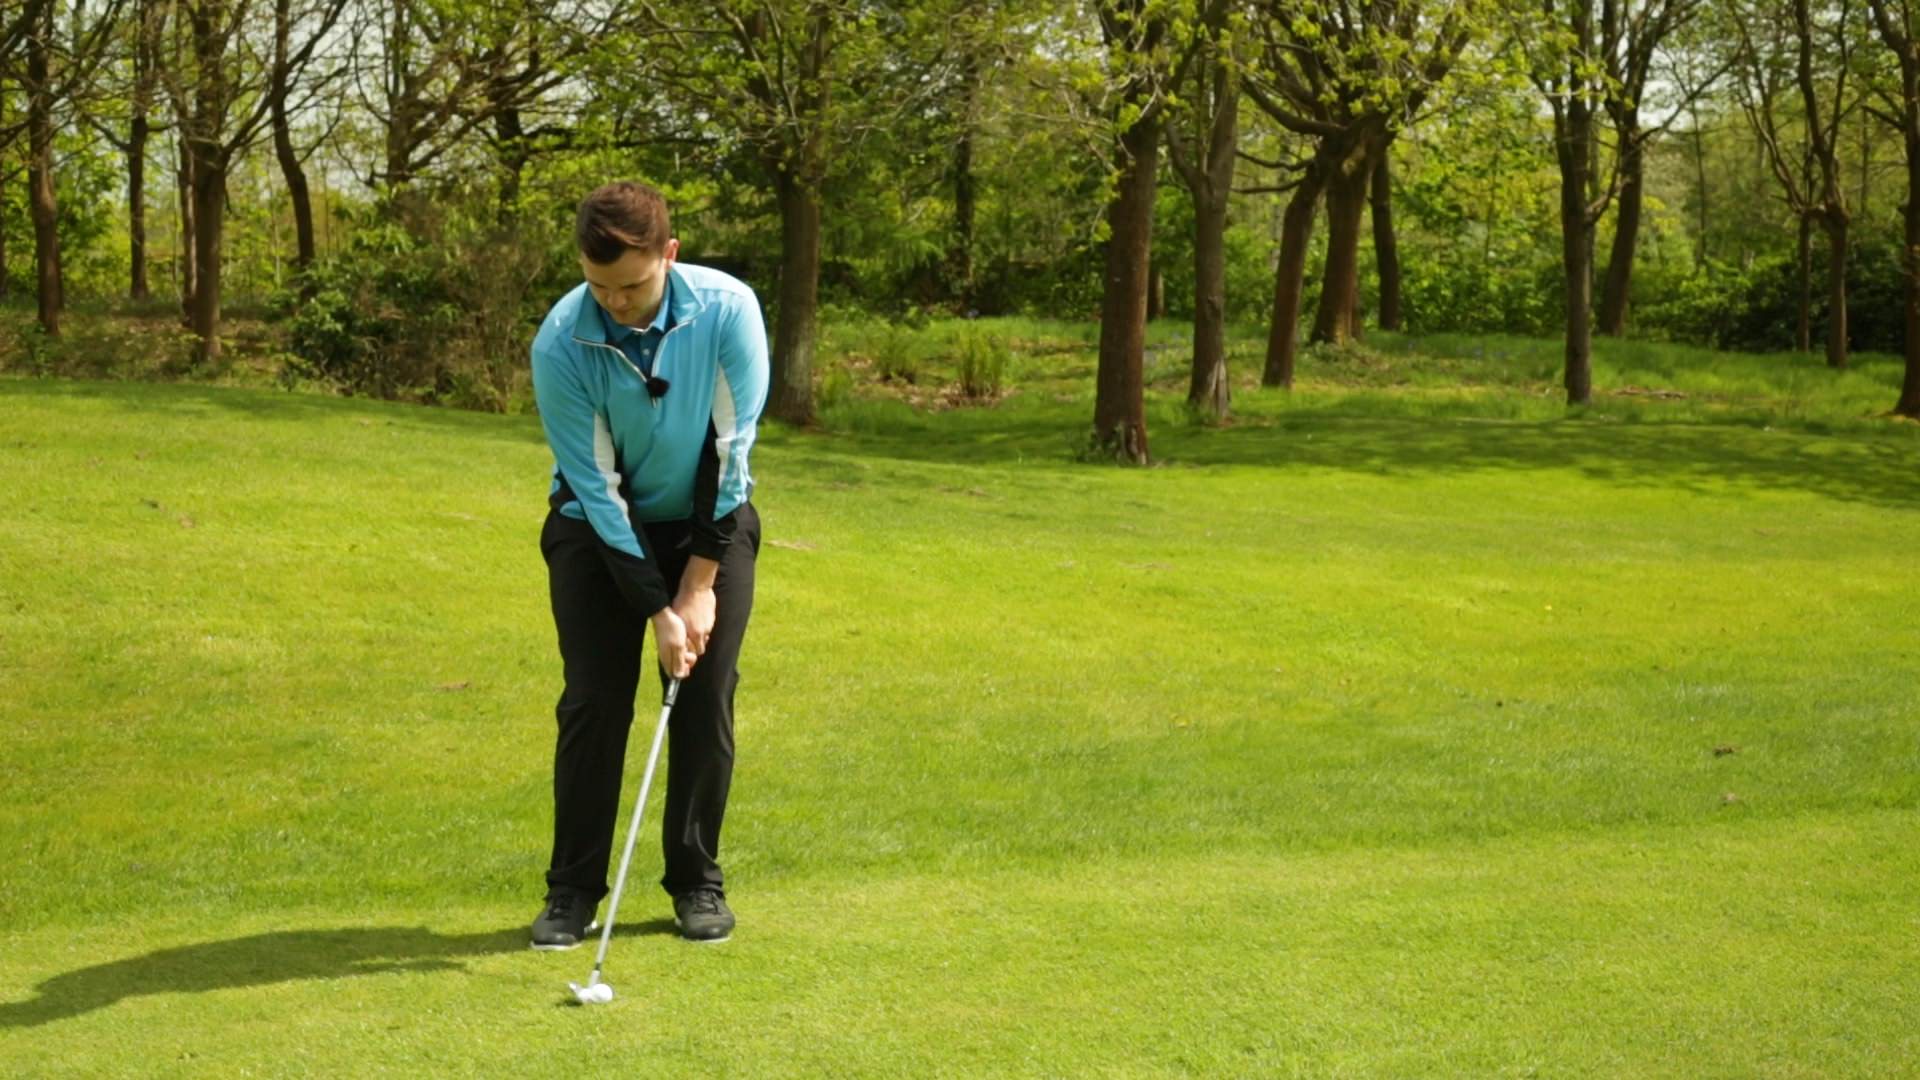 Learn the basic principles of chipping around the green